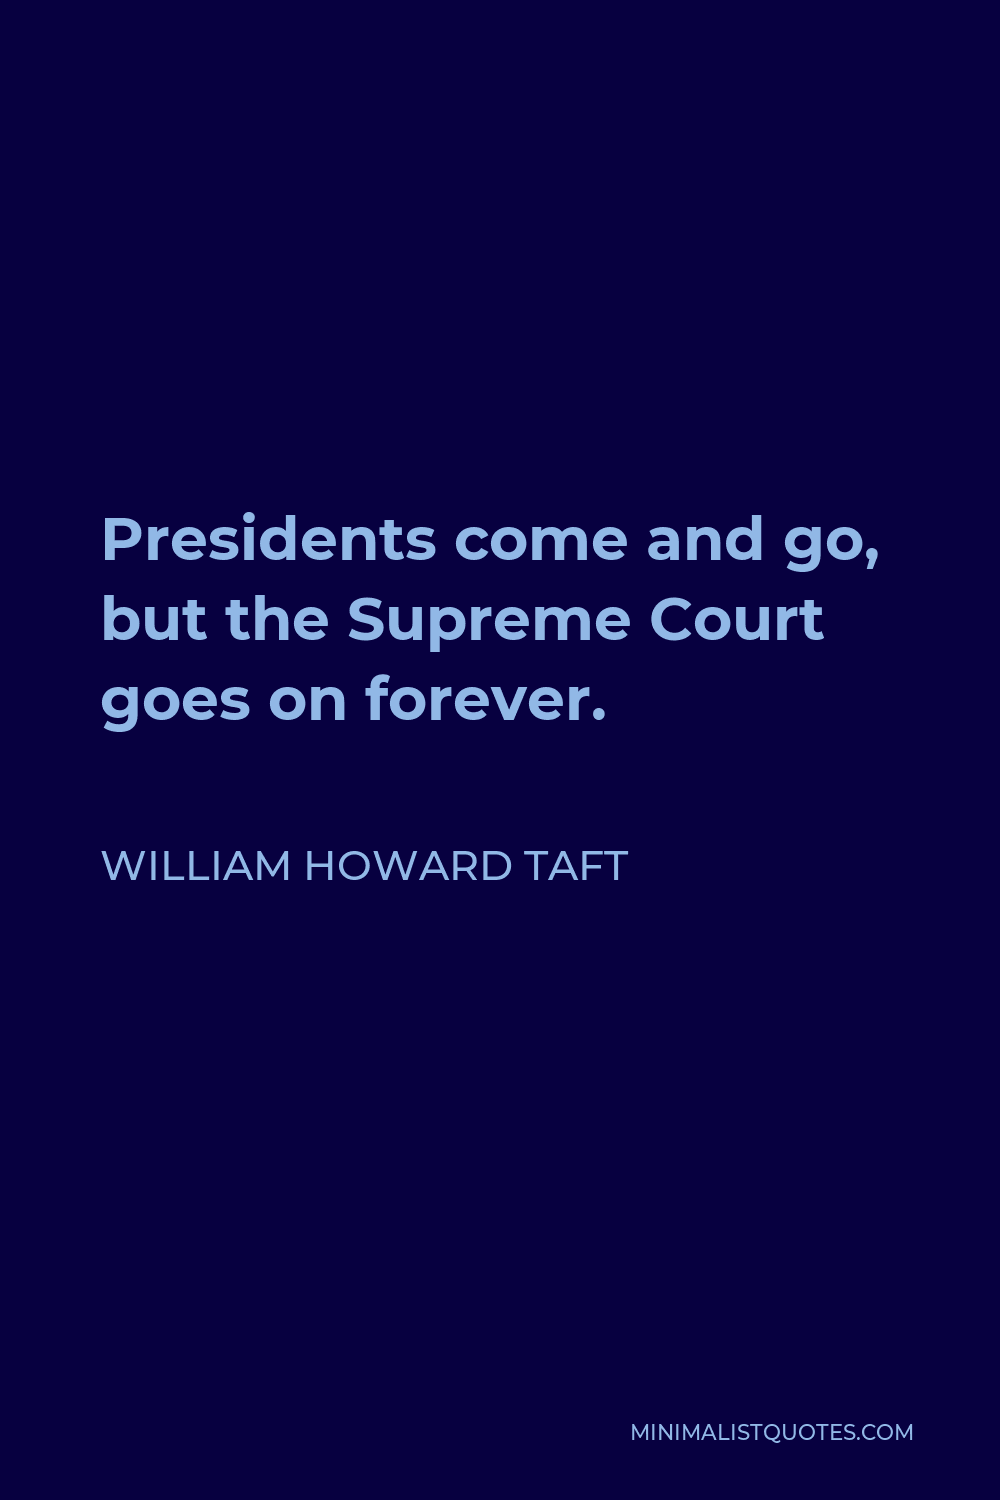 William Howard Taft Quote - Presidents come and go, but the Supreme Court goes on forever.